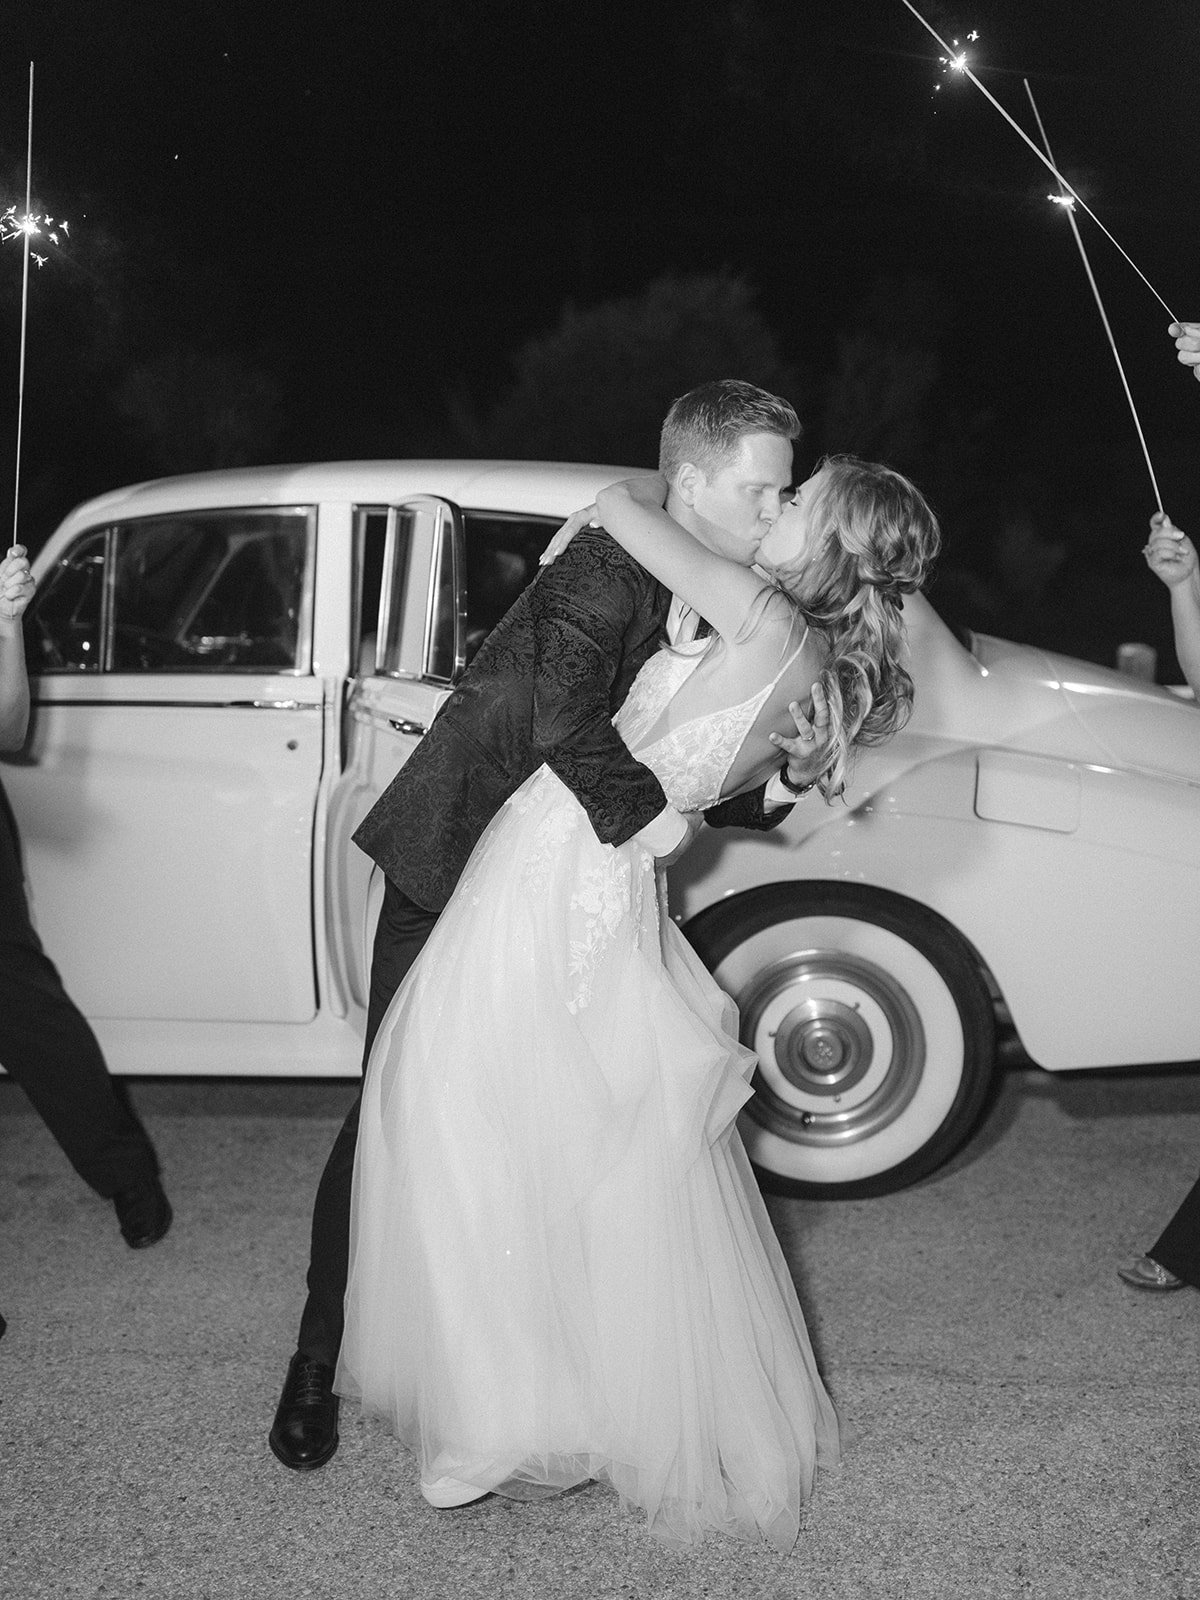 Bride and groom kissing in front of vintage car for wedding send off